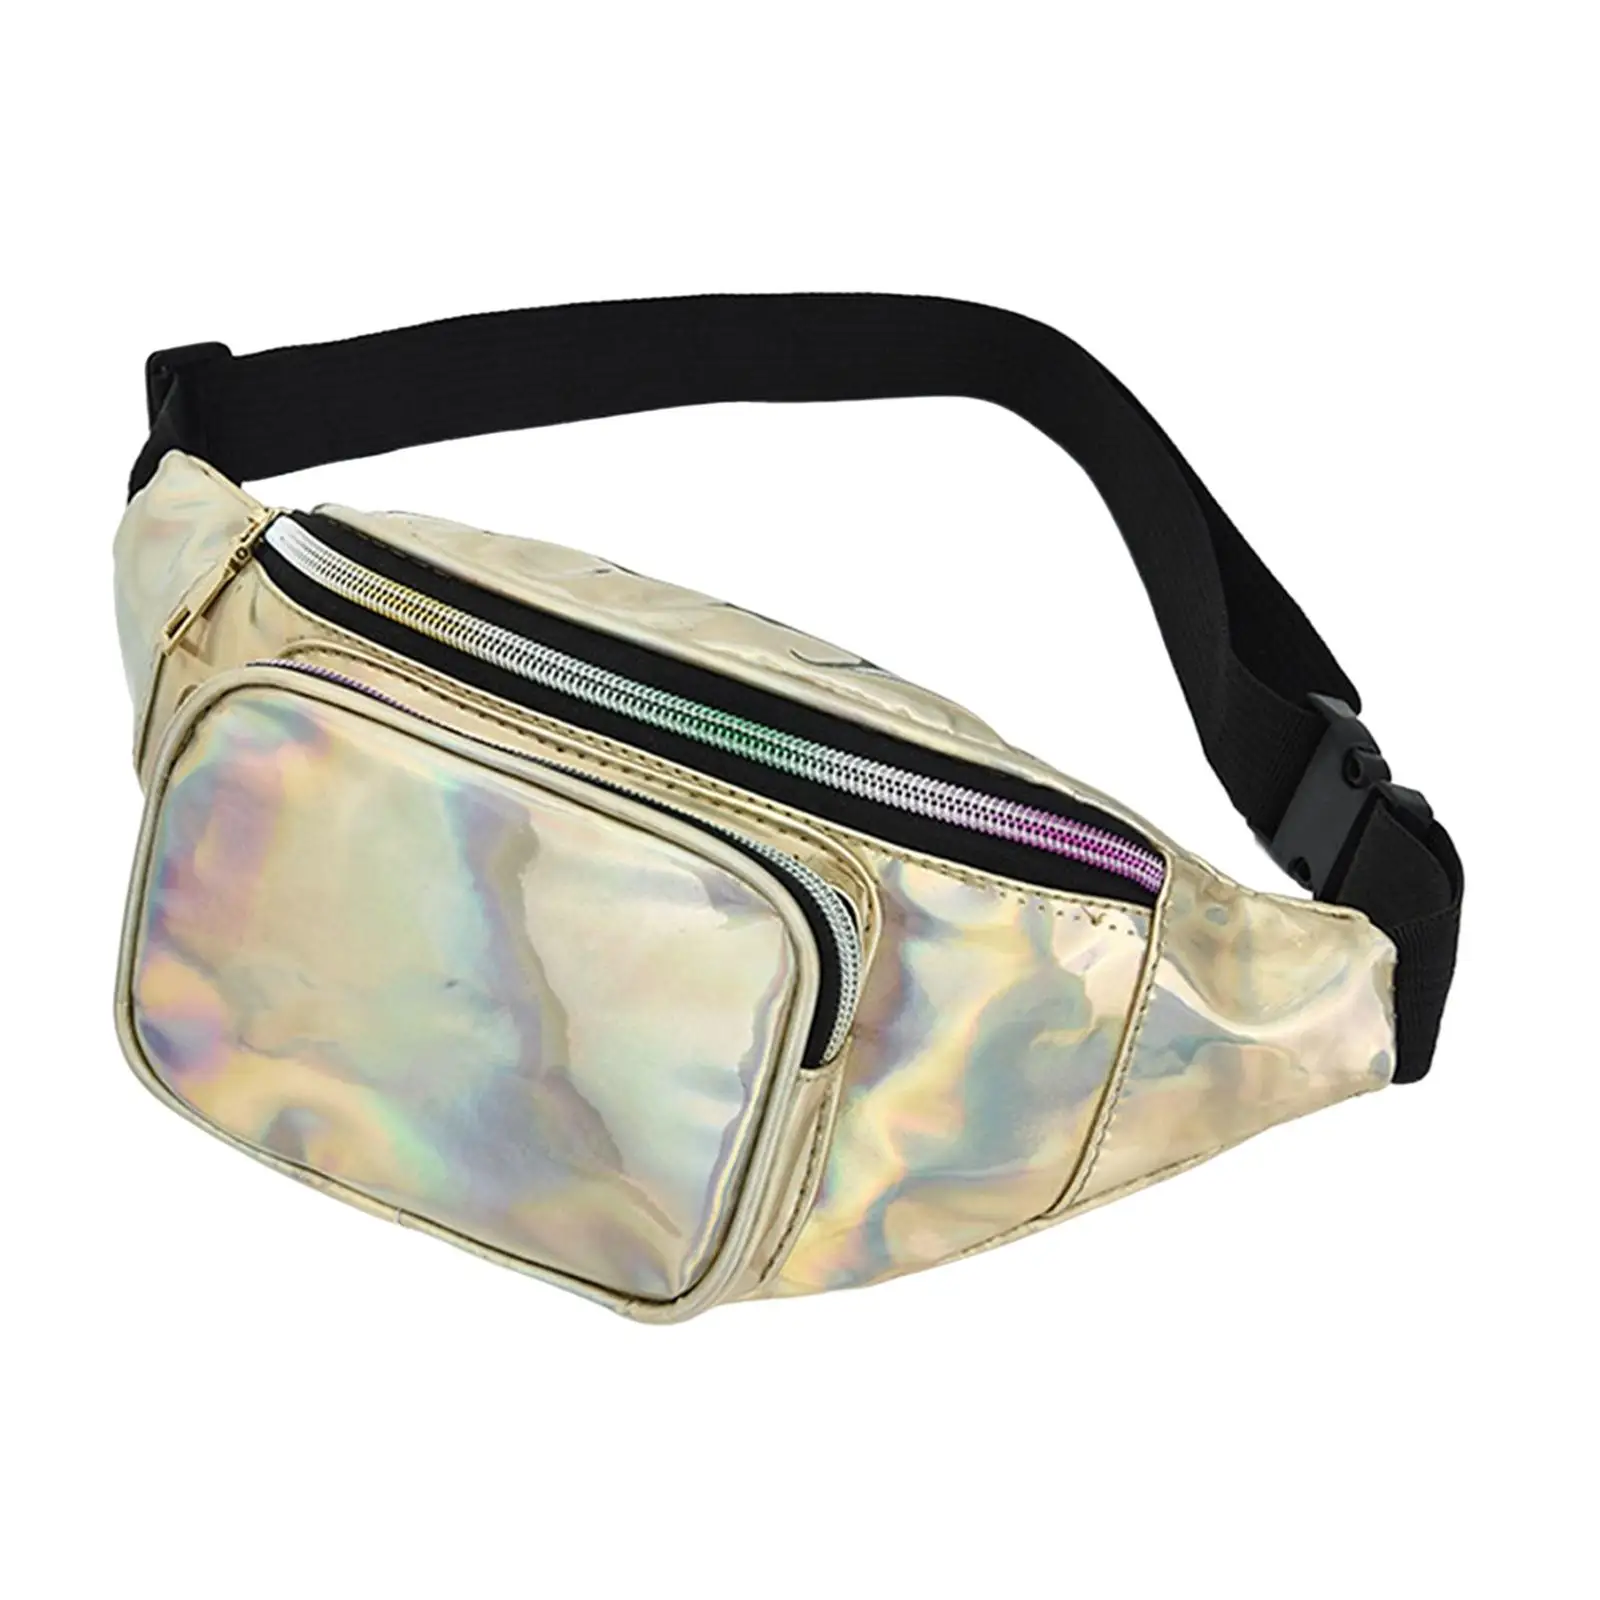 Waist Bag Chest Pocket Holographic Easy Carry Water Resistant for Travelling Hiking Phone